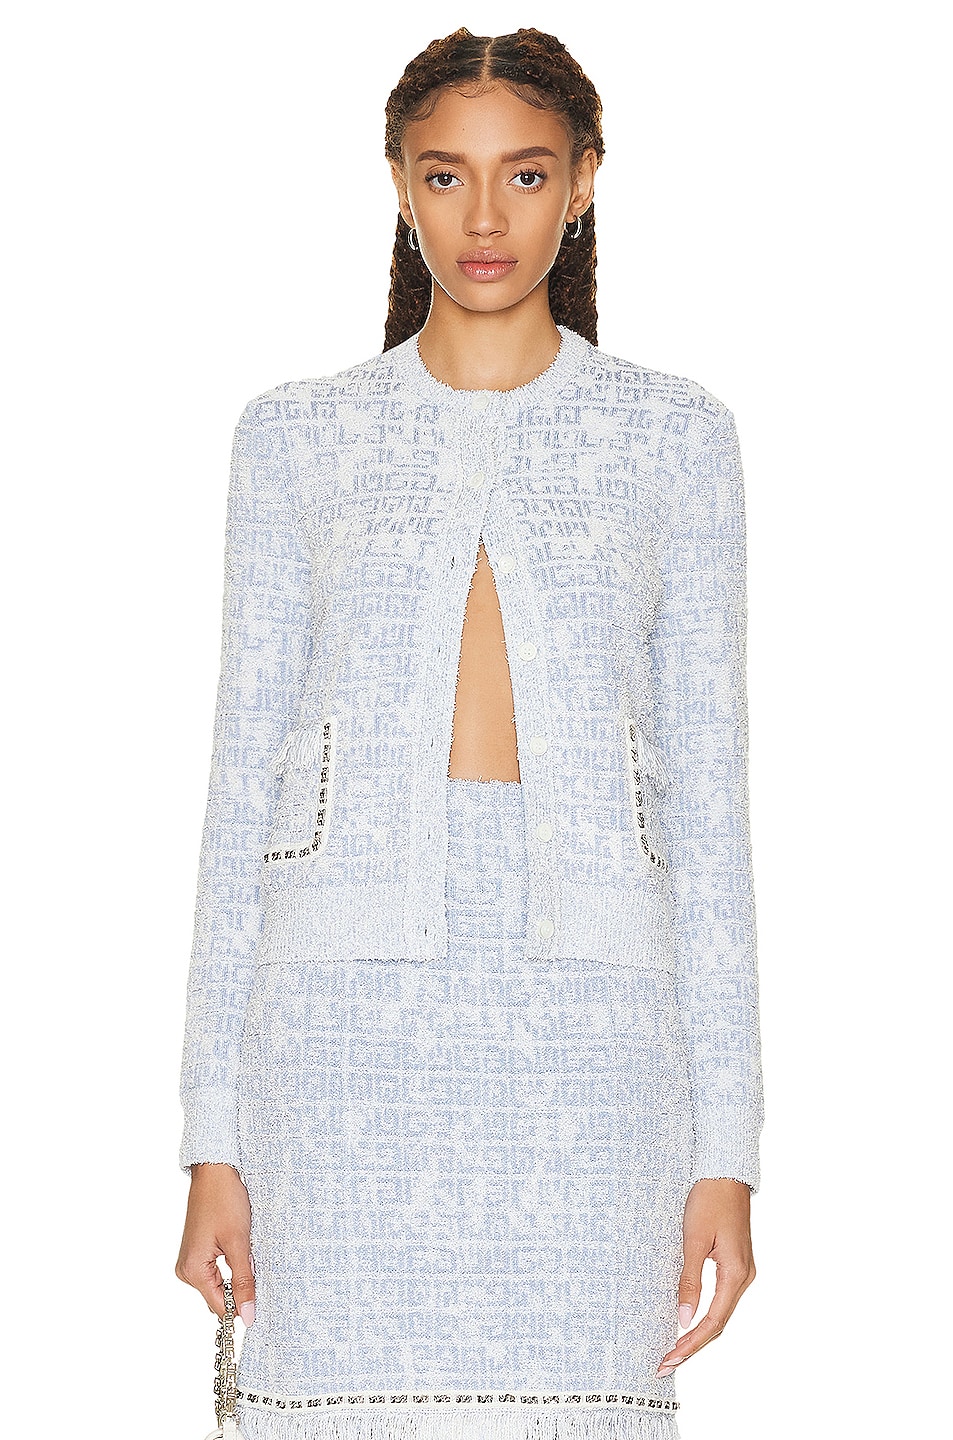 Givenchy Cropped Cardigan in Blue & White | FWRD